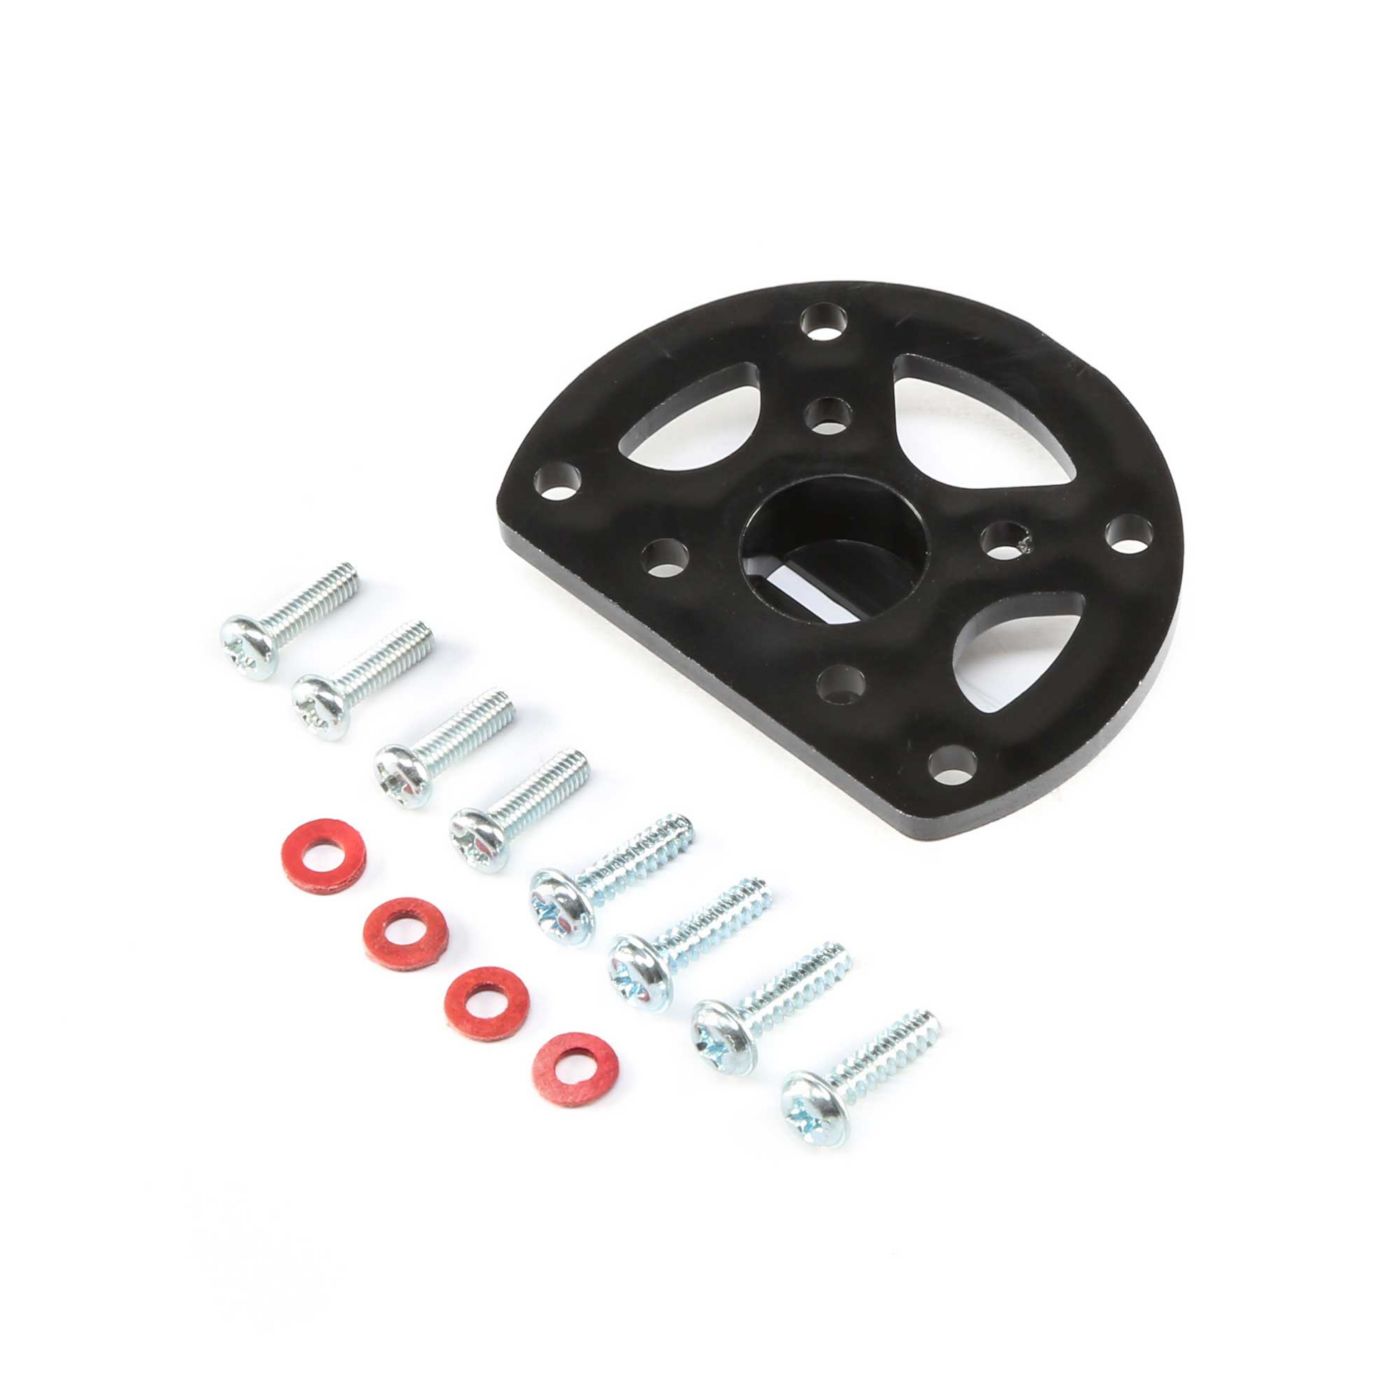 Hobbyzone Motor Mount with Screws For Carbon Cub S+ 1.3m HBZ3227